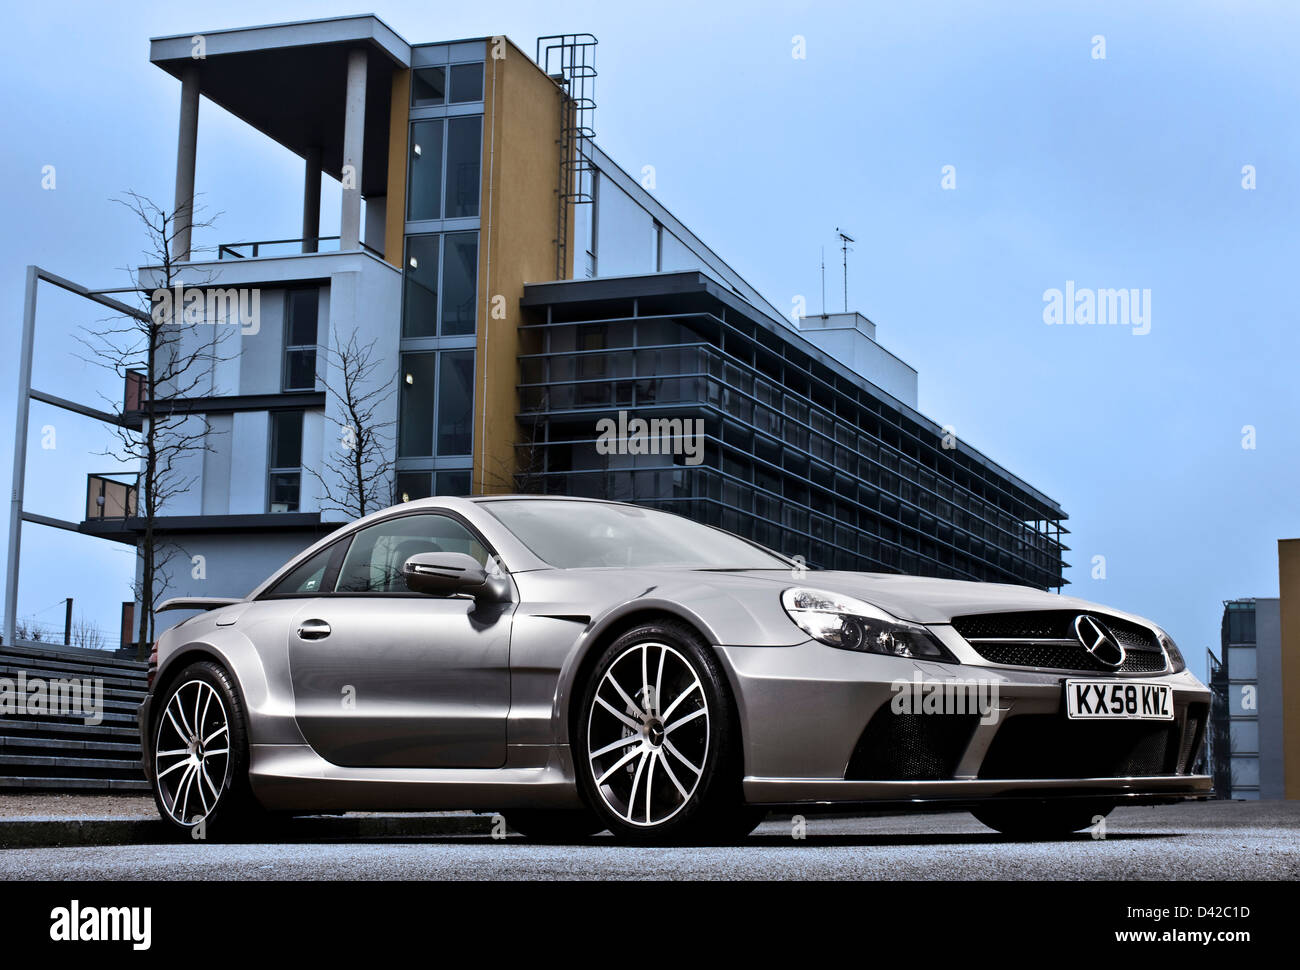 Silver Mercedes Benz SL 65 parked in urban environment Stock Photo